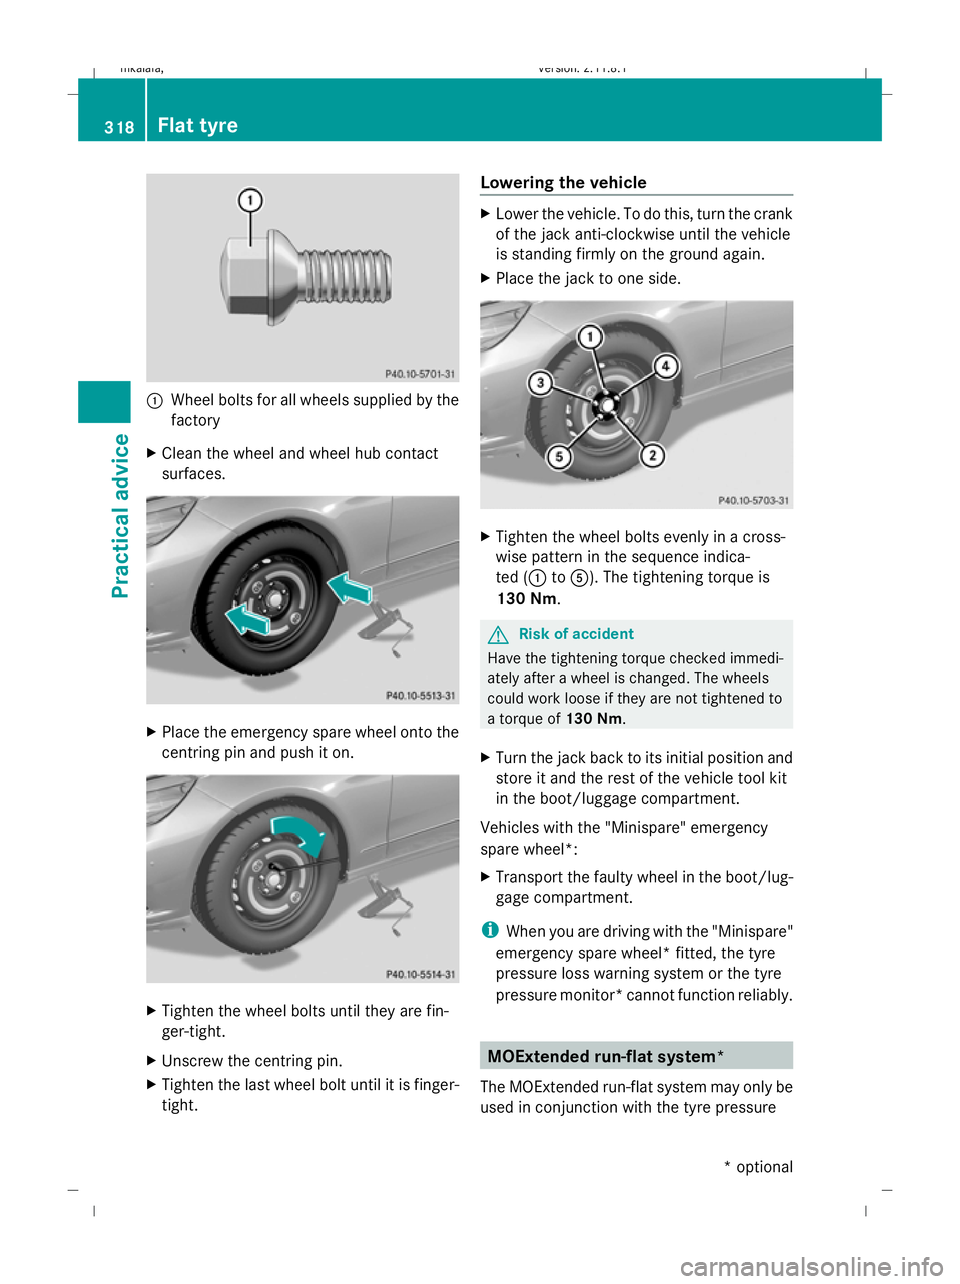 MERCEDES-BENZ E-CLASS ESTATE 2009  Owners Manual :
Wheel bolts for all wheels supplied by the
factory
X Clean the wheel and wheel hub contact
surfaces. X
Place the emergency spare wheel onto the
centring pin and push it on. X
Tighten the wheel bolts